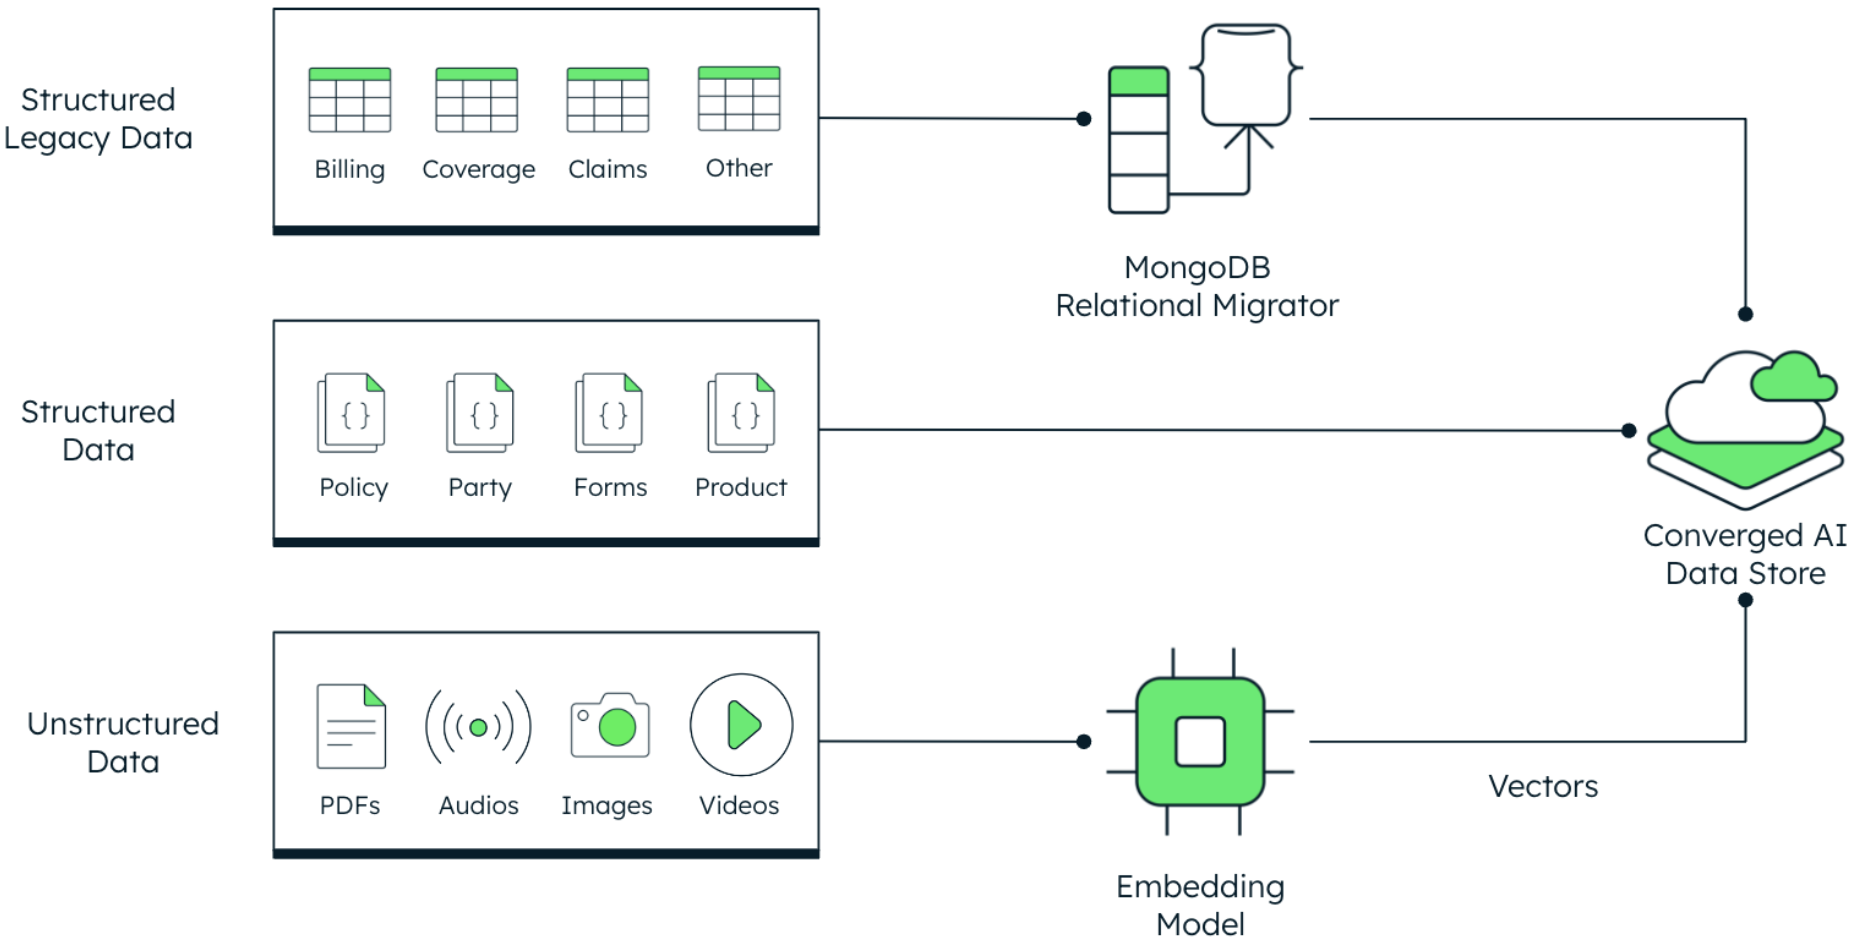 Diagram of different types of data being stored in MongoDB. On the left, buckets of Structured Legacy Data, Structured Data, and Unstructured data are presented. Structured Legacy Data connects to the MongoDB Relational Migrator, before flowing into the Converged AI Data Store. Structured Data flows directly to the AI Data Store. And Unstructured Data connects to an Embedding Model, which then flows into the AI Data Store utilizing vectors.